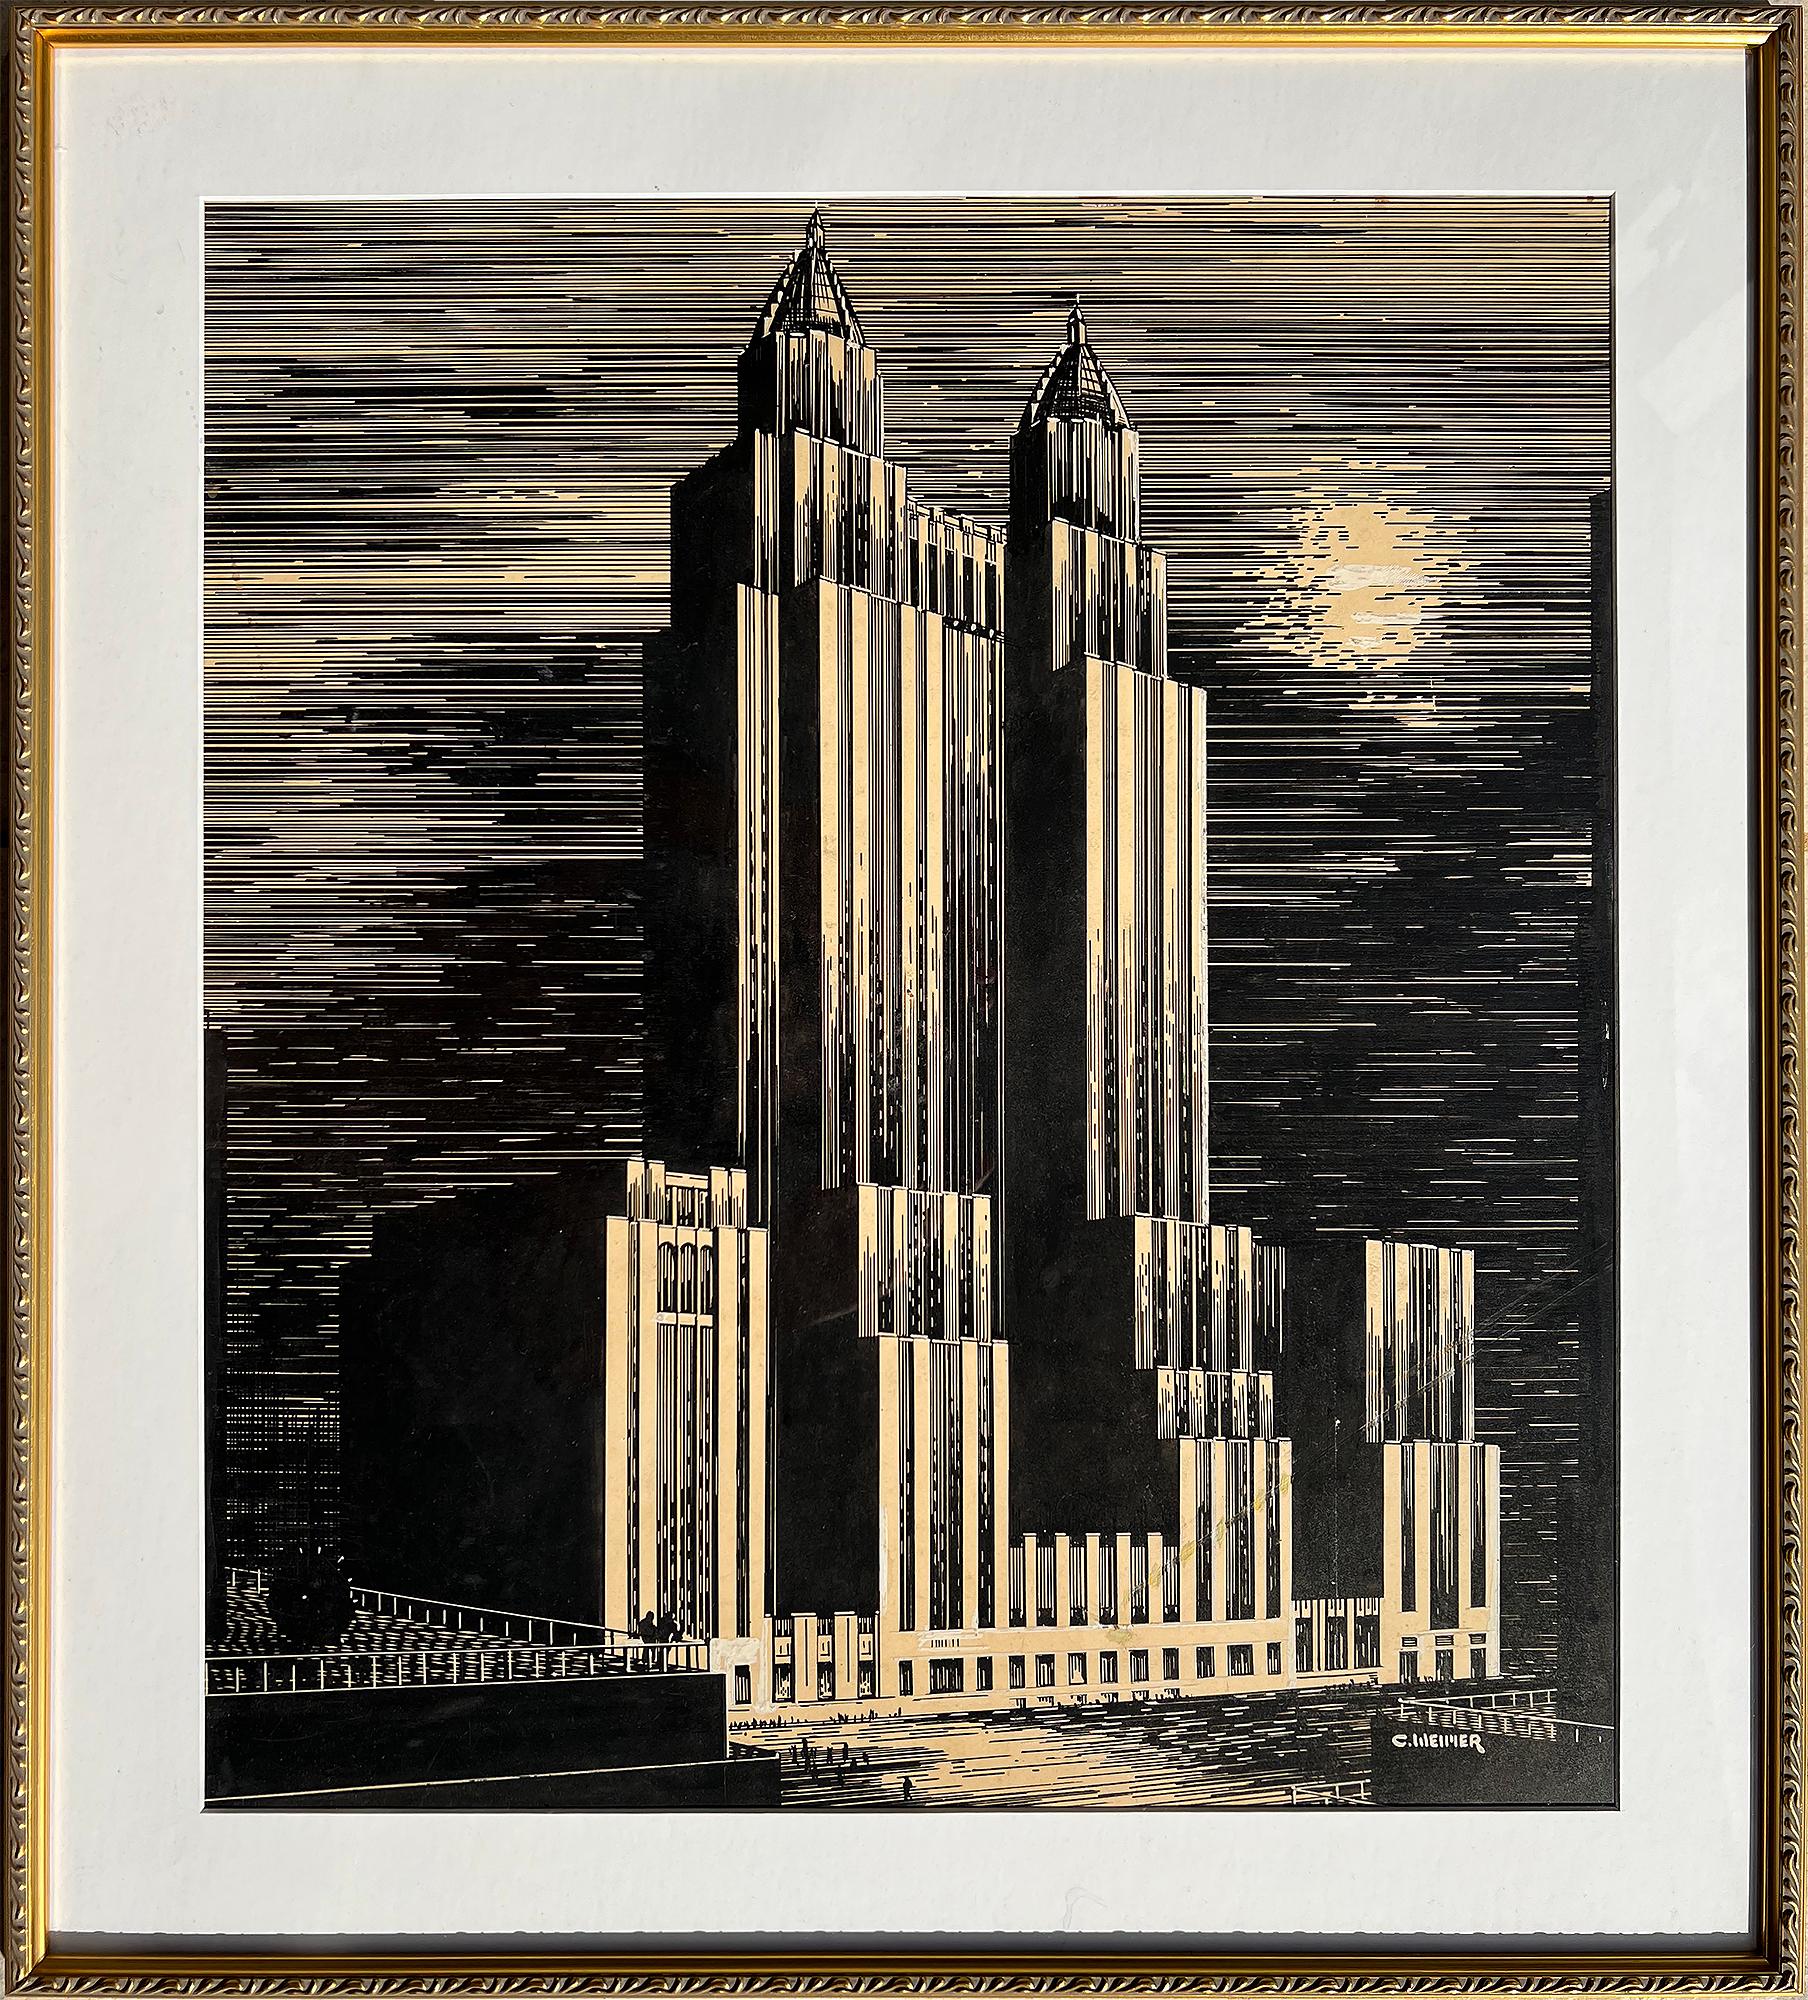 Waldorf Astoria Art Deco Illustration  - Painting by Charles Perry Weimer